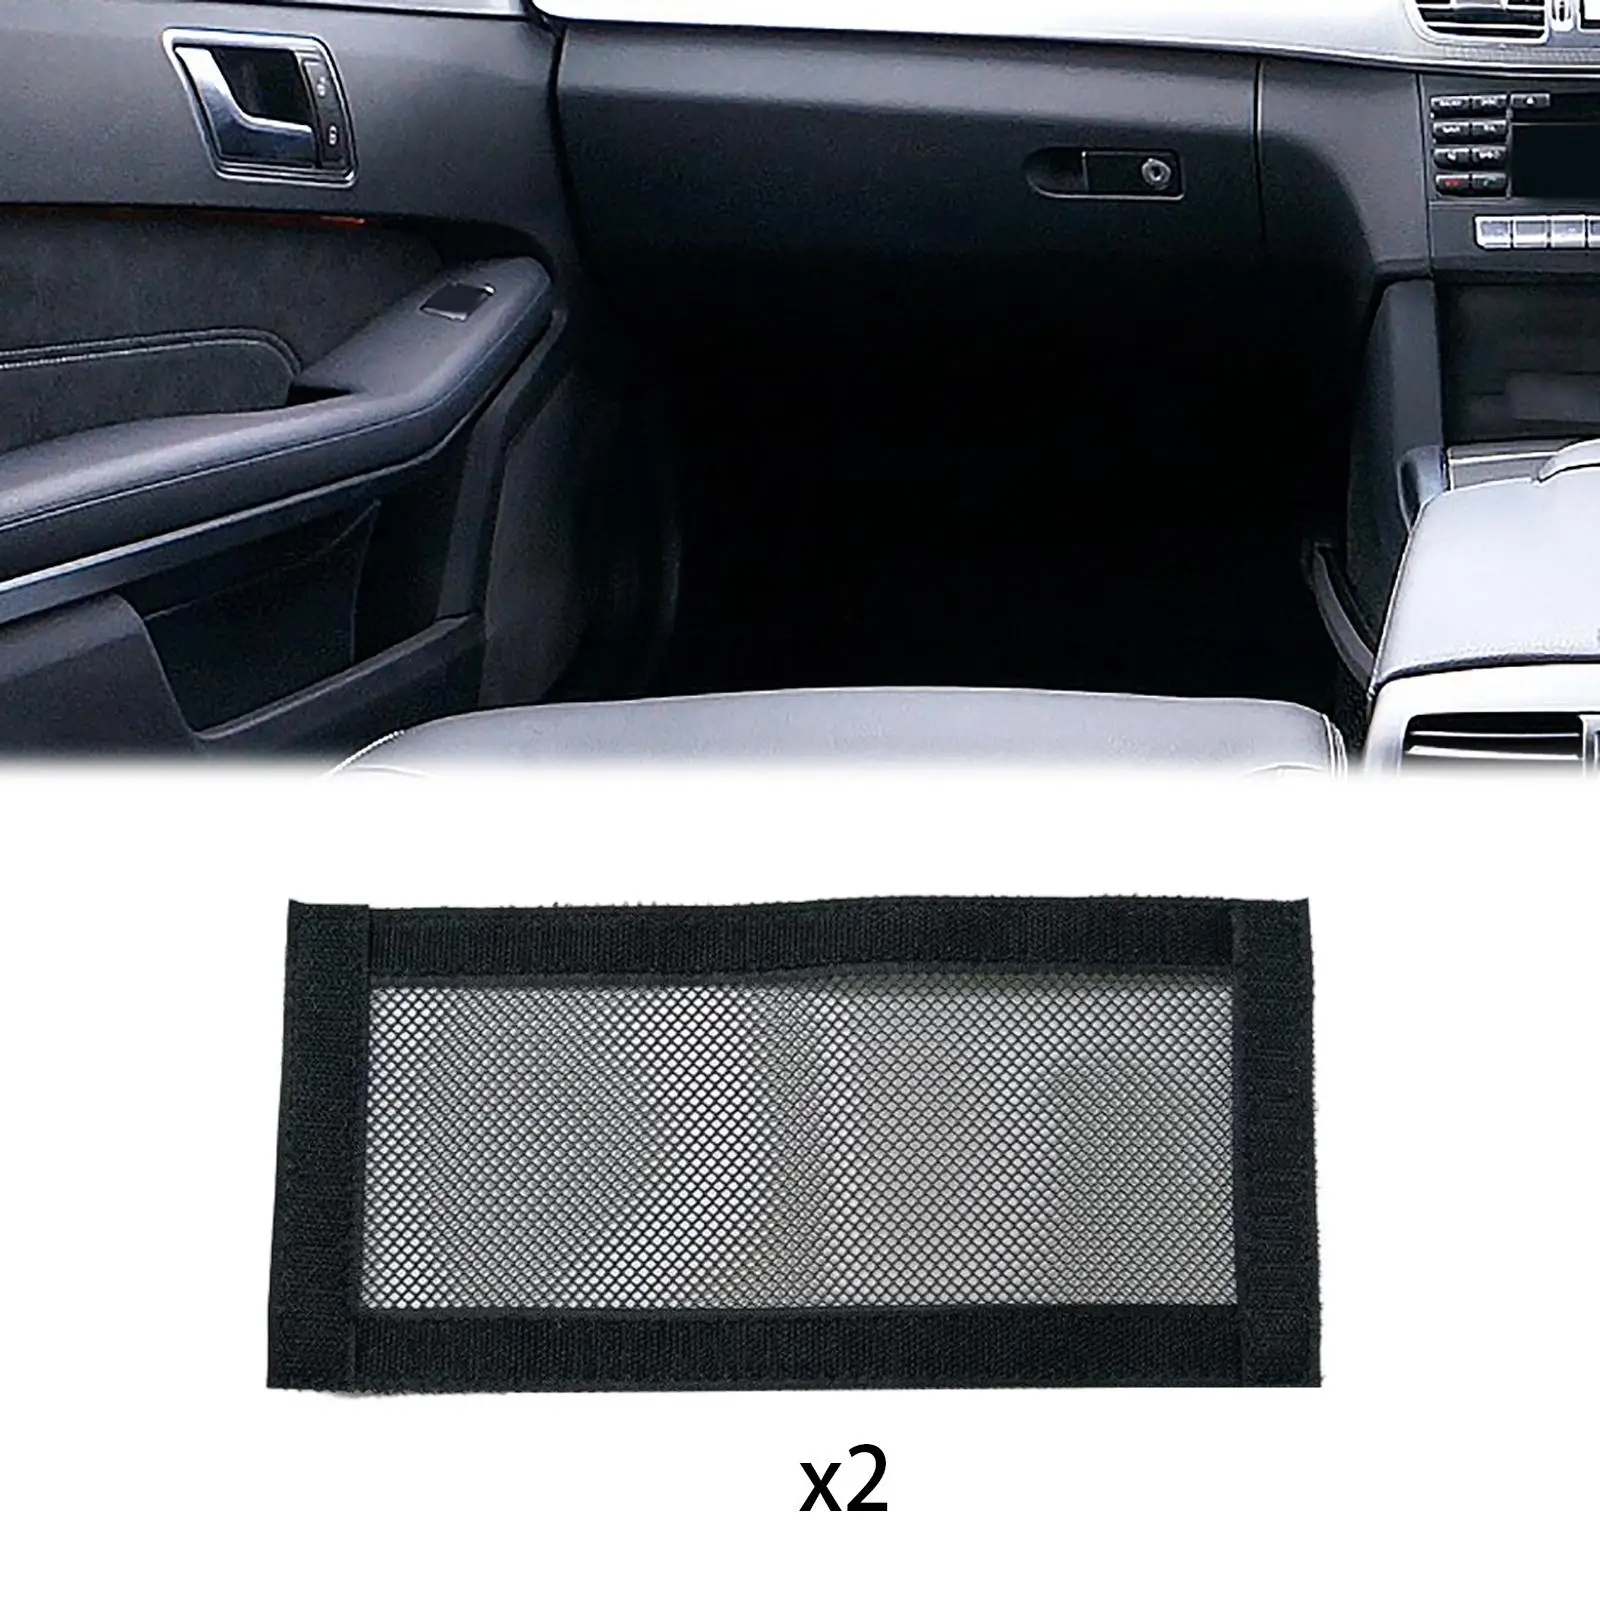 2 Pieces Automobile Air Conditioning Ports Cover Tesla Model 3 Model Y Seat Air Vent Decoration Accessories Car Air Outlet Cover